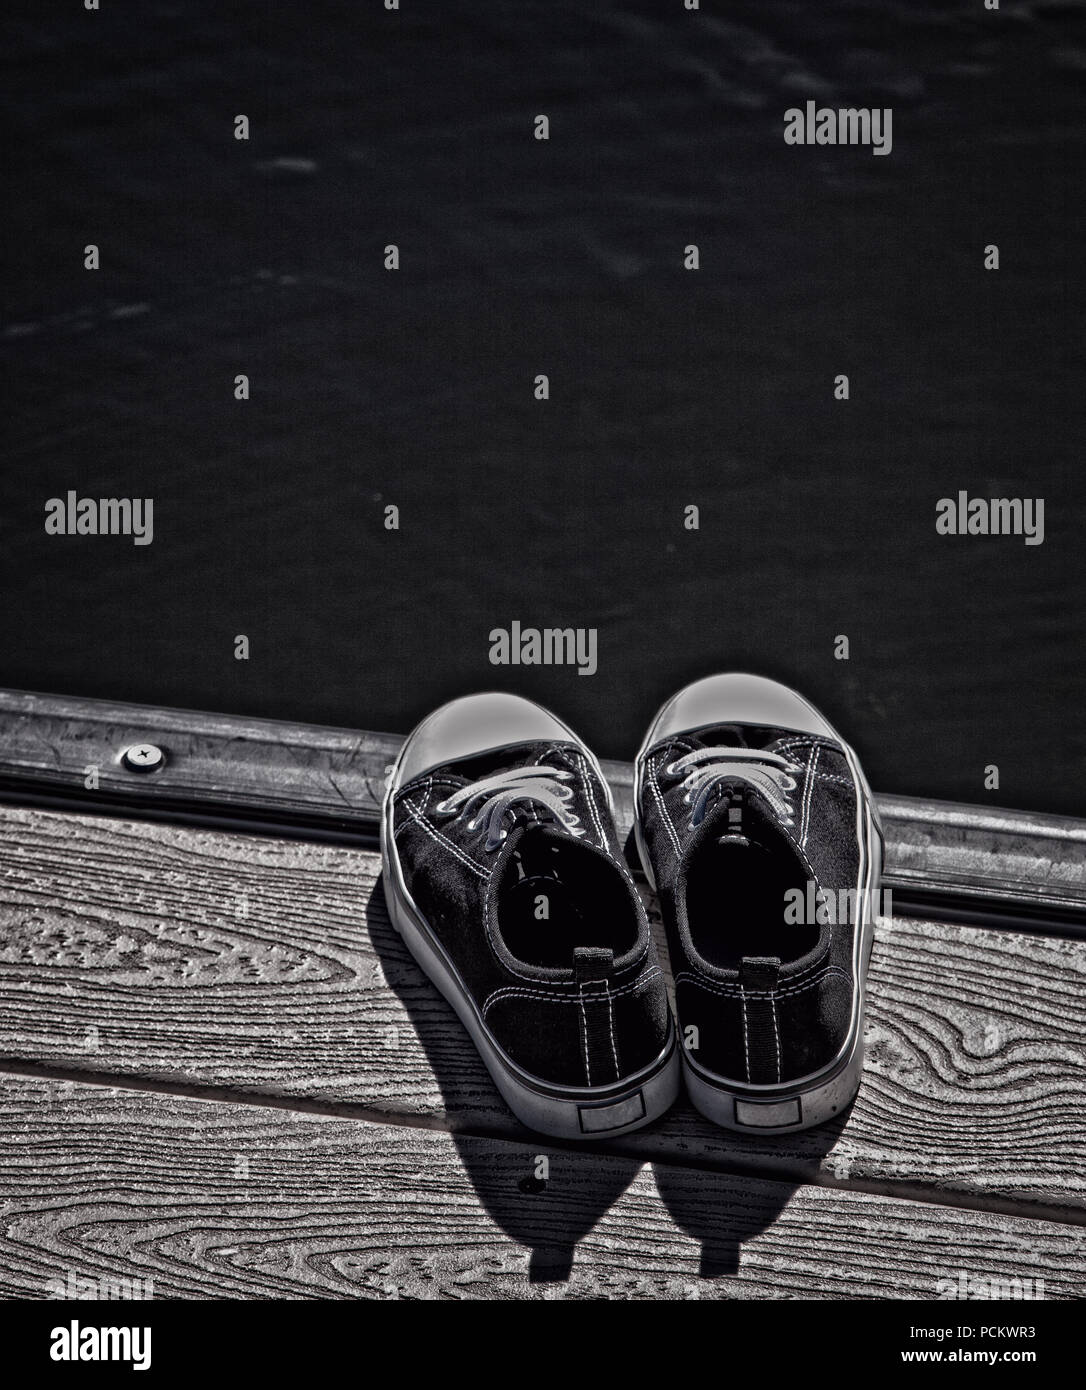 Dock Side, Peaceful, Alone, Stillness, nature, cottage, summertime, summer, water, dock, shoes, peace, outside, tranquil, nature, freedom Stock Photo